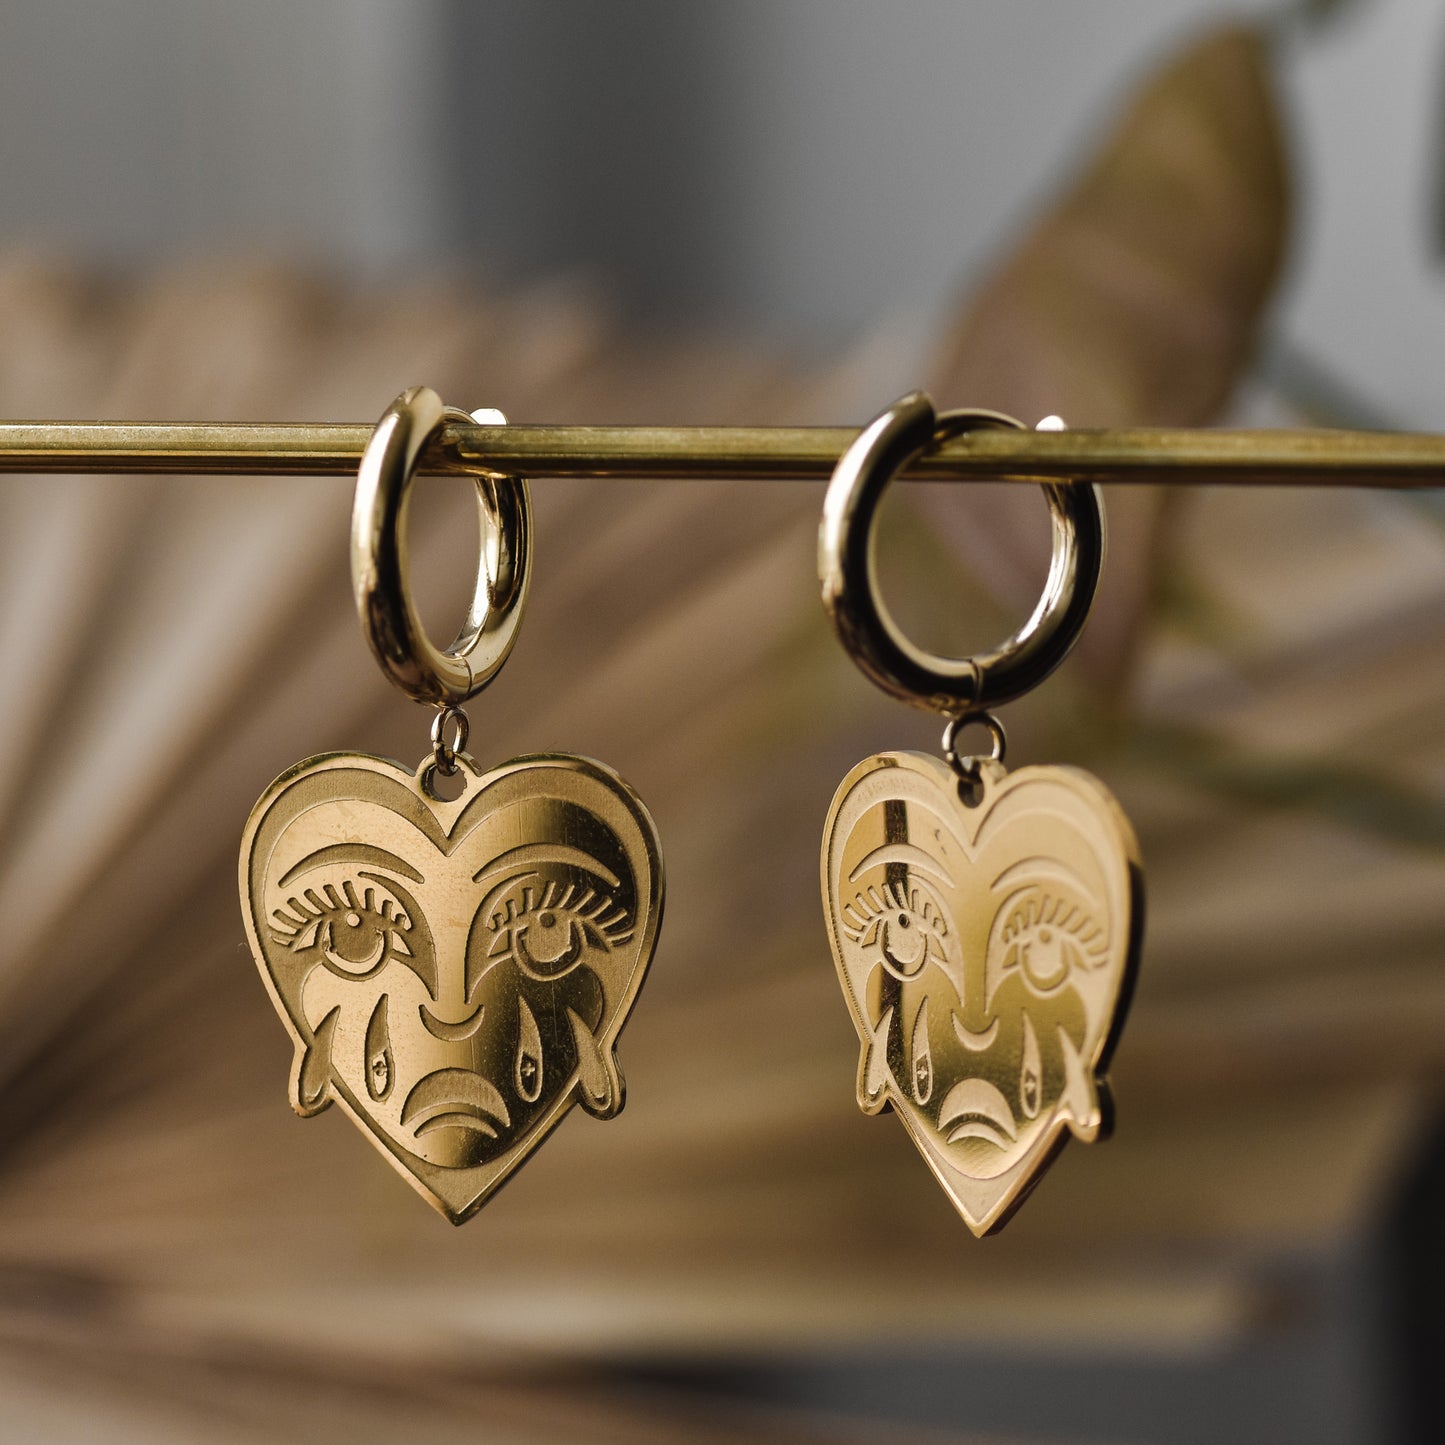 Crying Heart Earrings - Gold